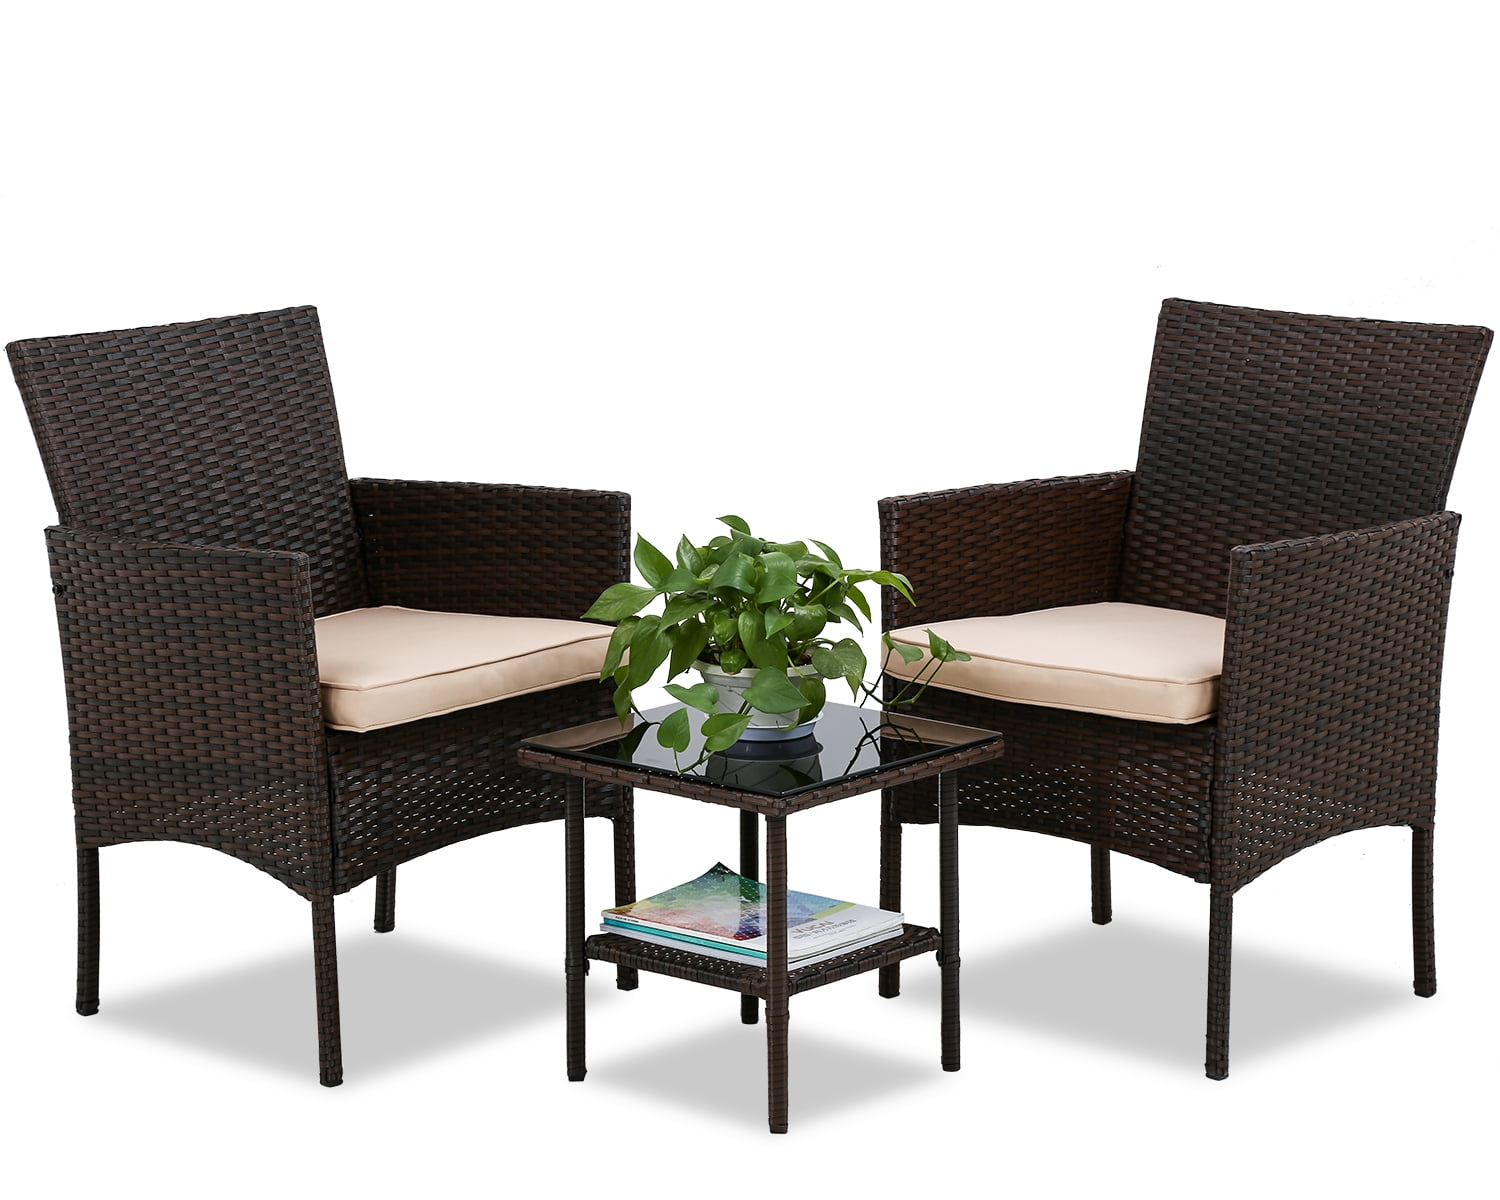 Patiomore 3 Pieces Outdoor Bistro Set Cushioned Furniture Set PE Wicker Patio Chairs with Coffee Table Brown 